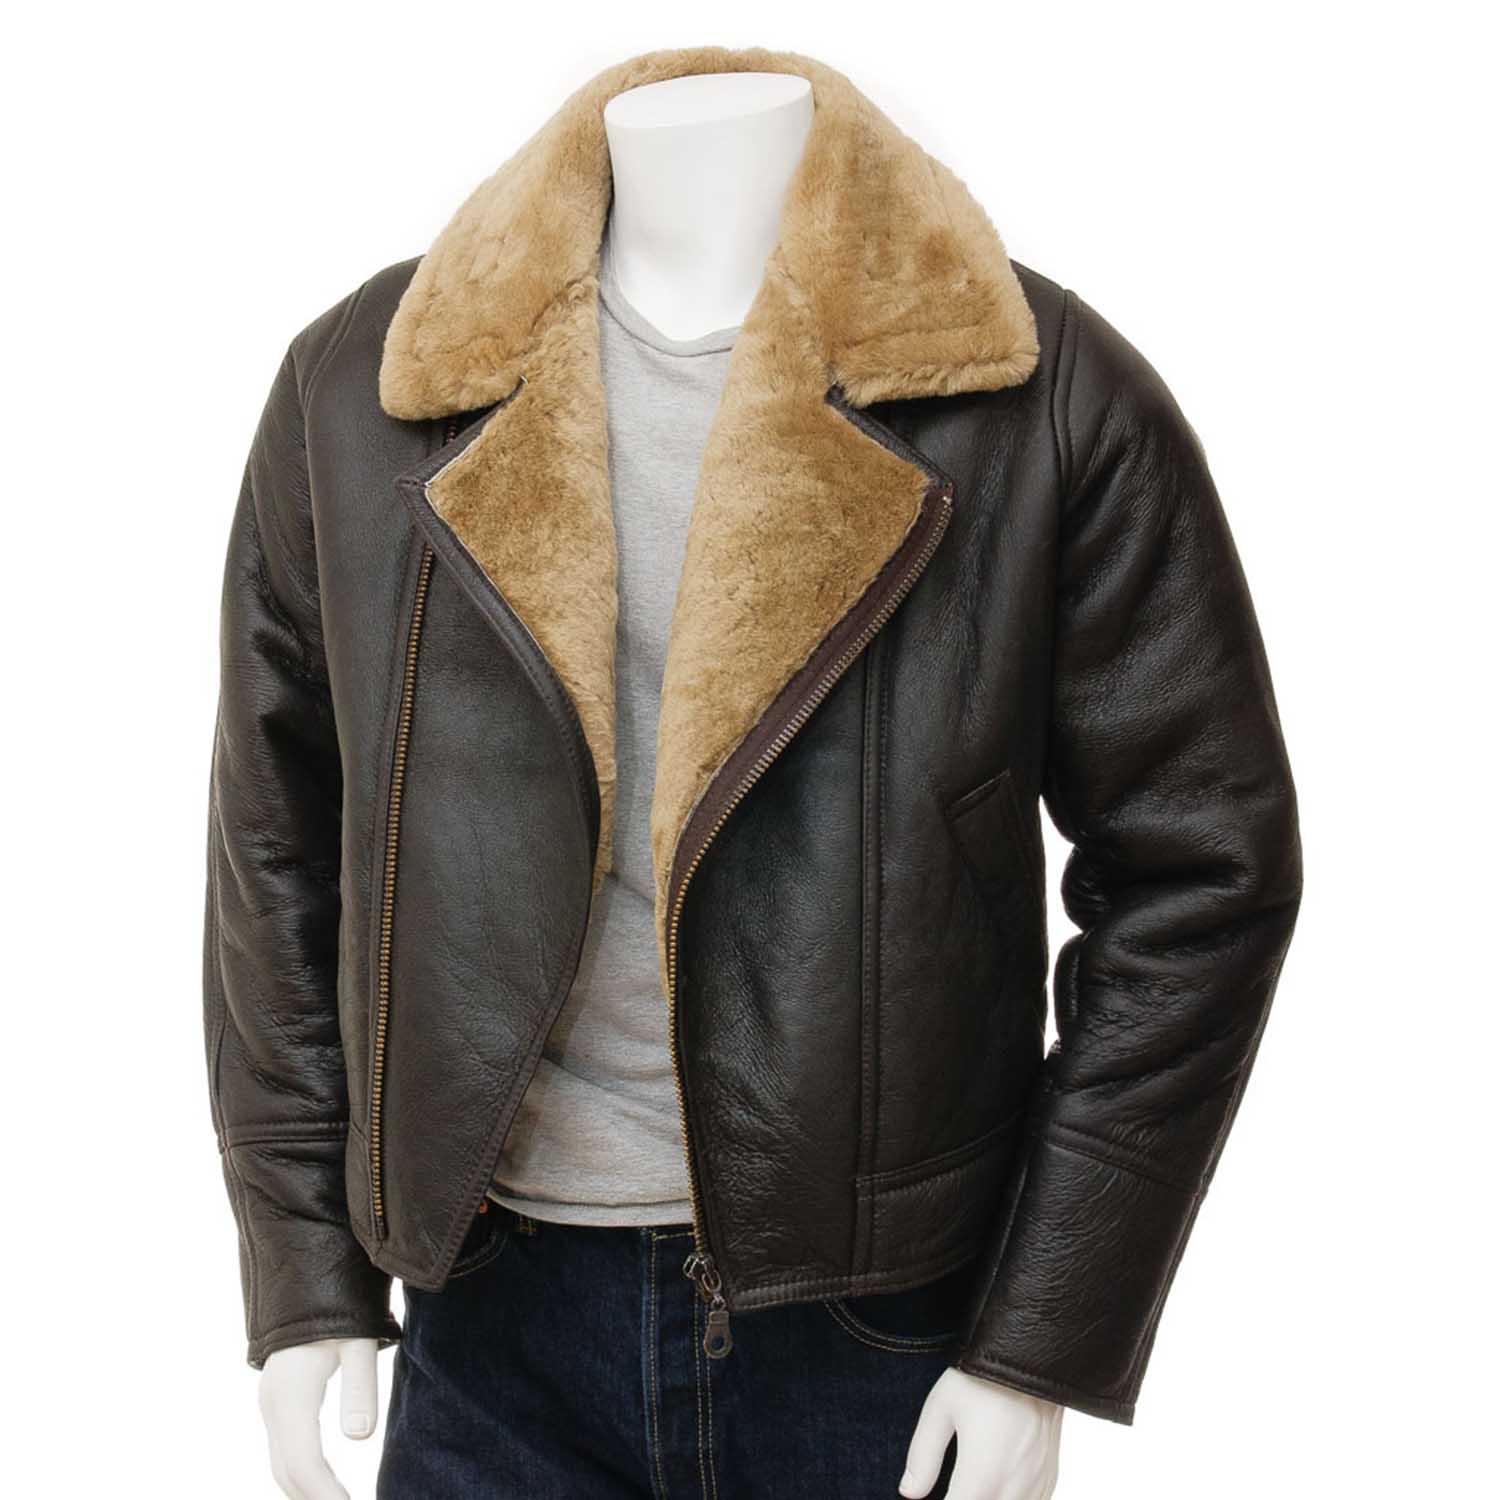 Men's Brown and Ginger Sheepskin Jacket - Blazon Leather